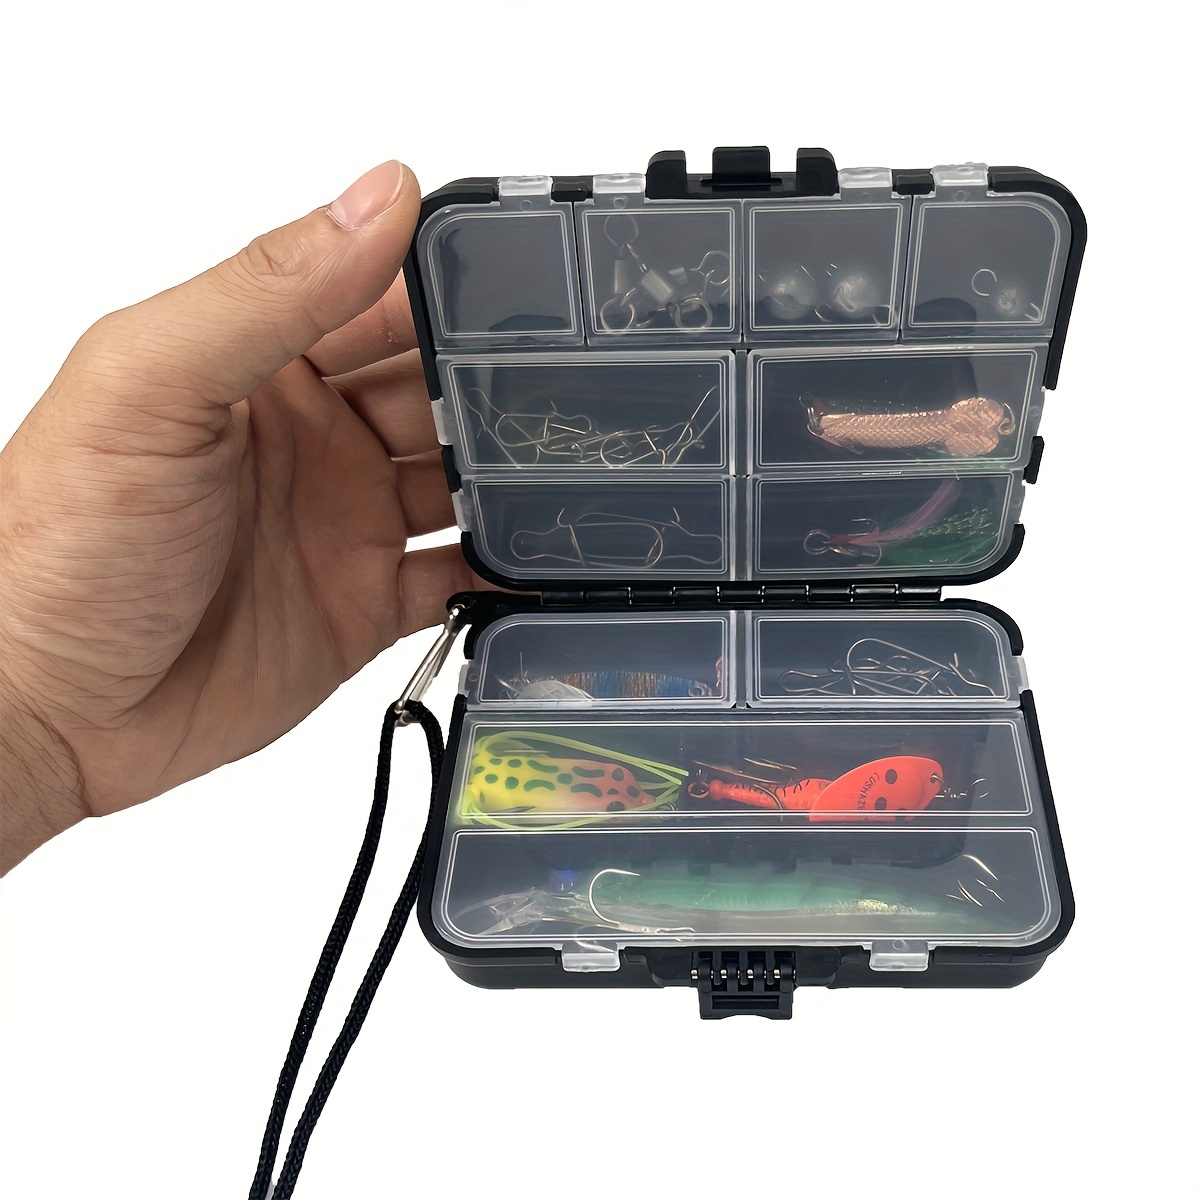 FISHING.EVIKE The Fishing Portable High Speed Tackle Box, MORE